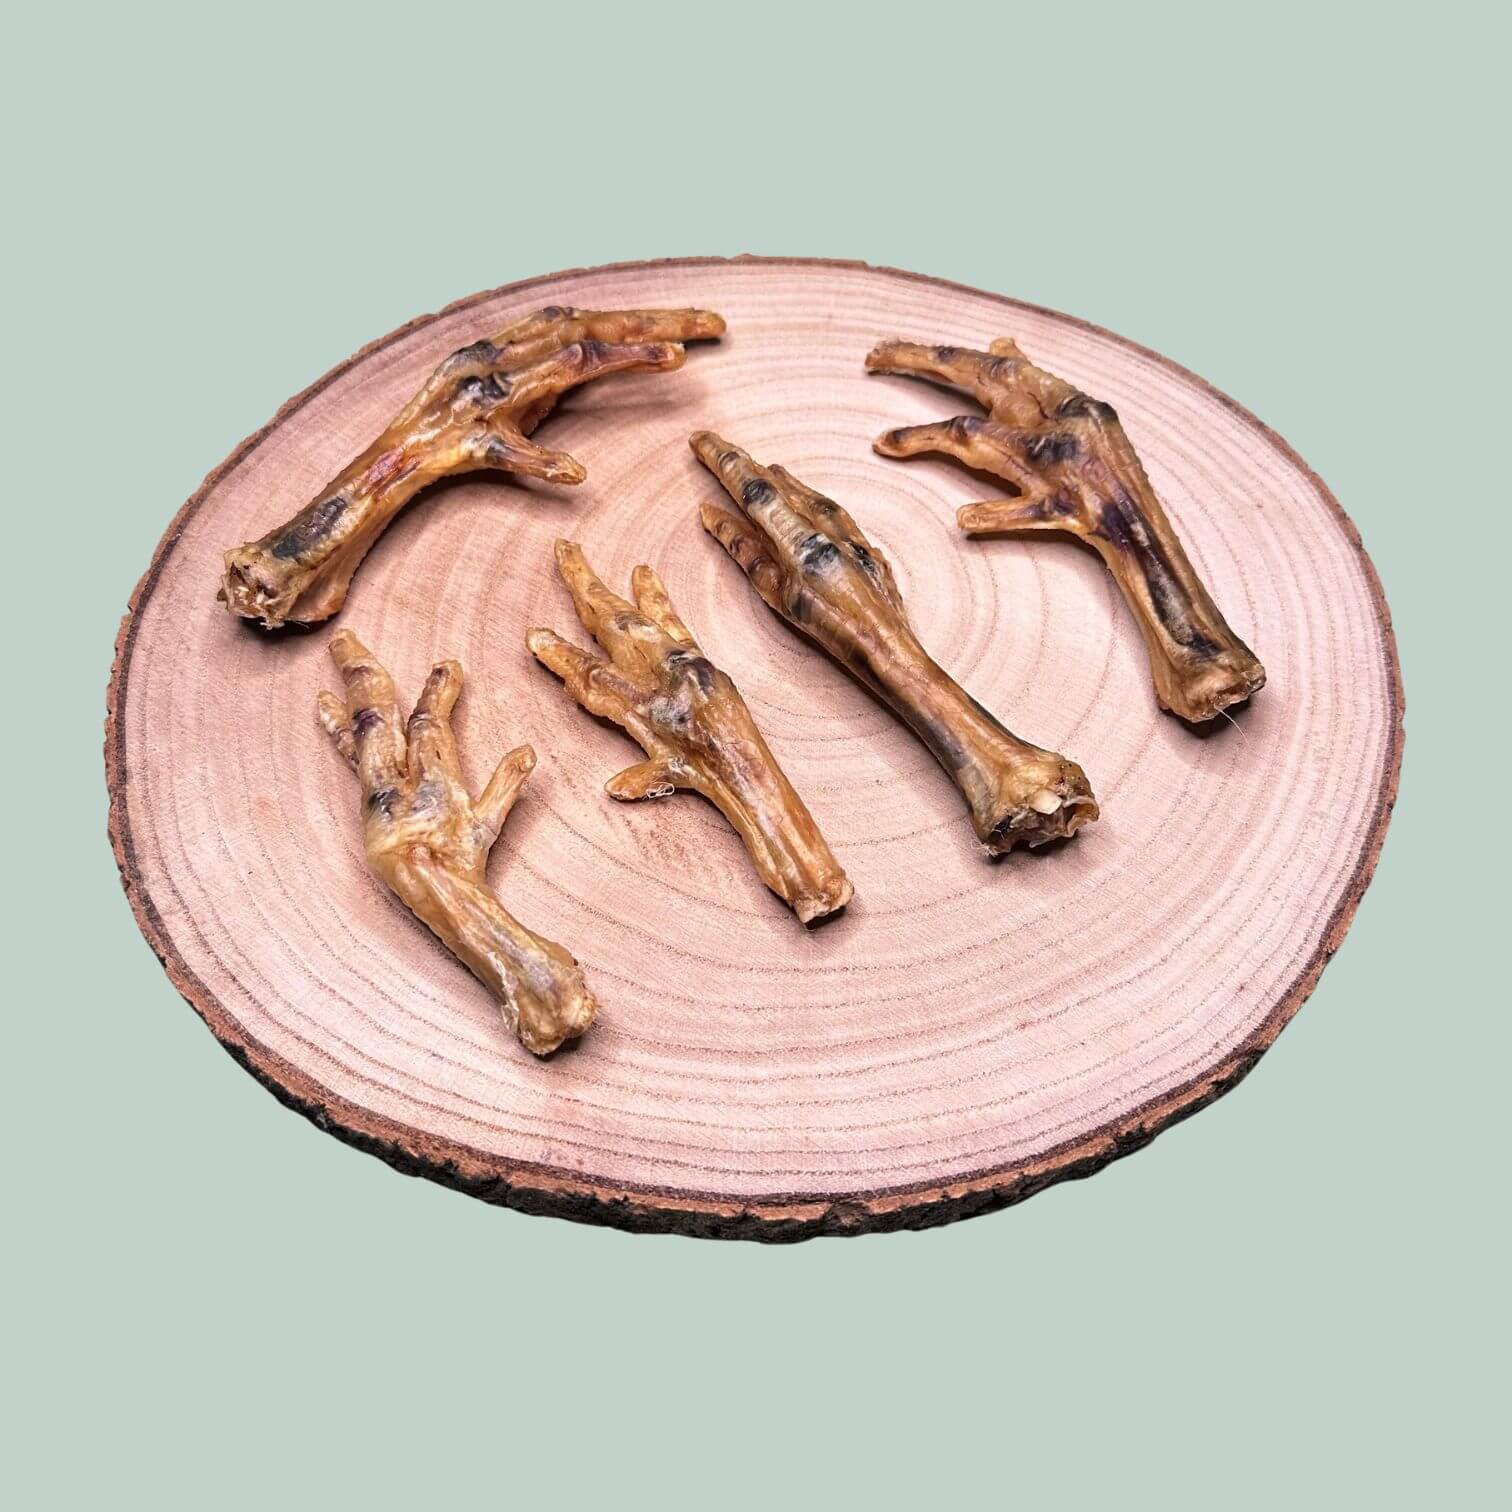 Pack of 5 dried chicken feet natural and healthy dog treats and chews